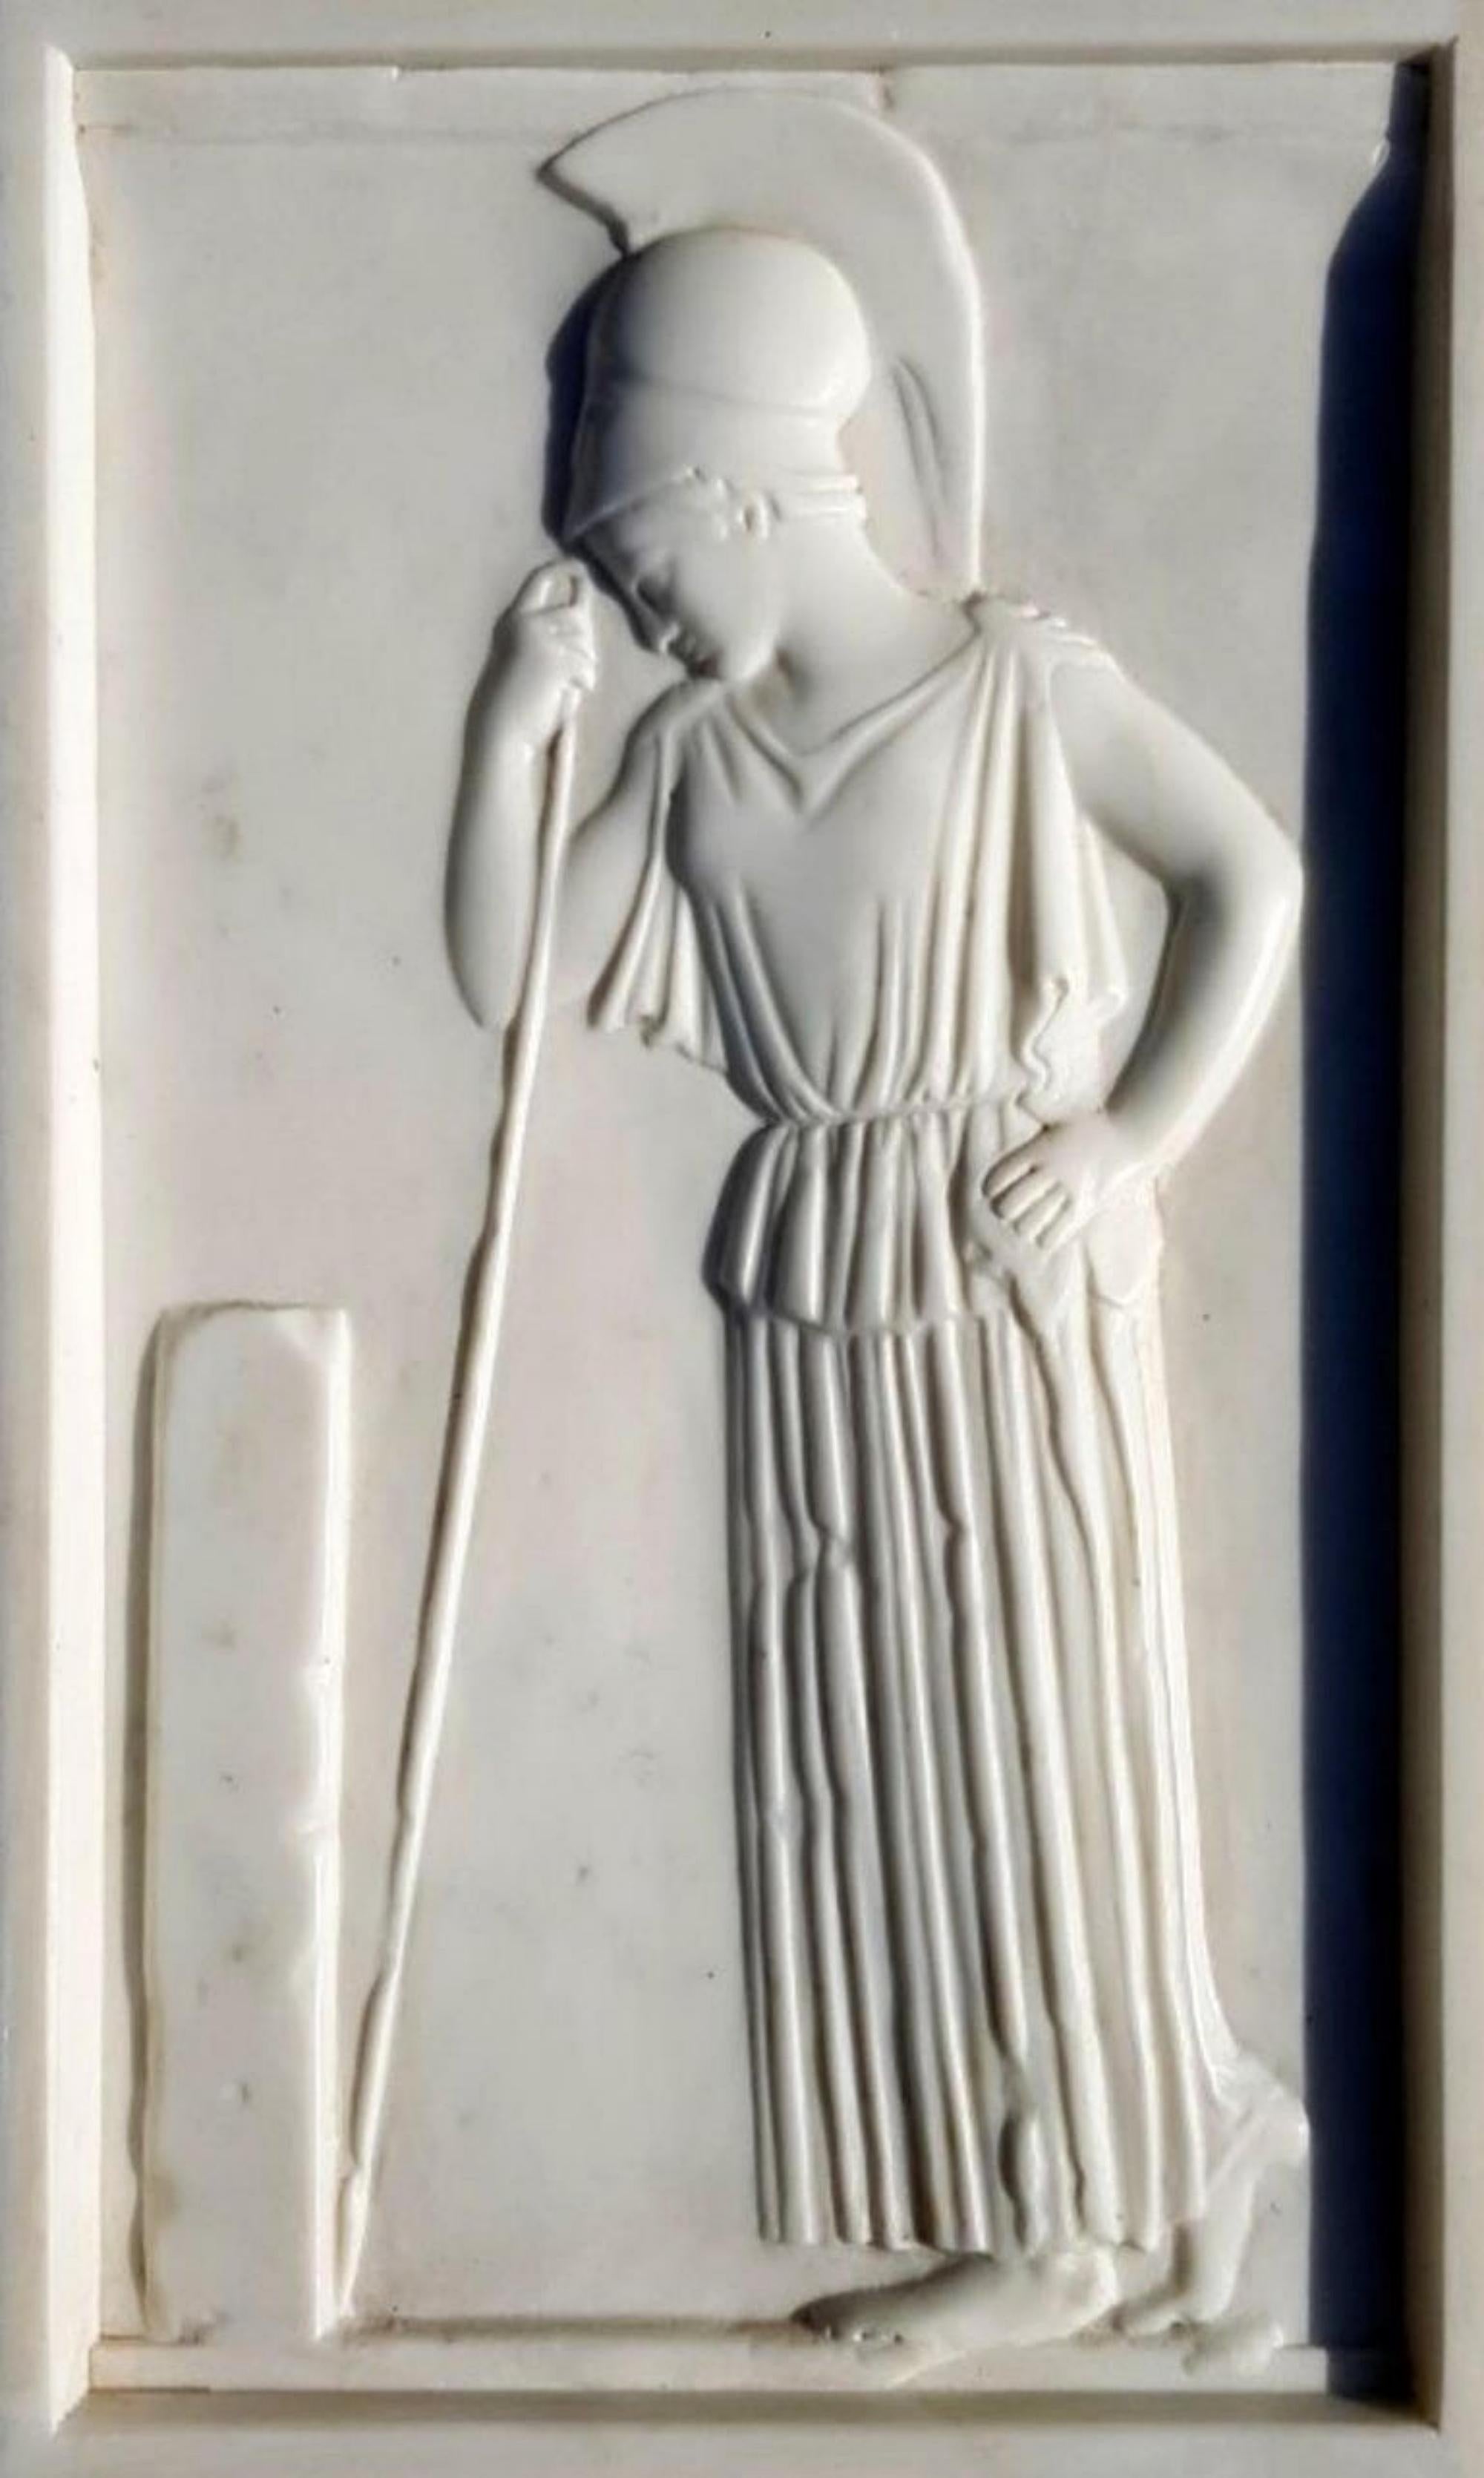 Bas-relief in marble
Apuan statuary of thinking Athena
End 19th century
Italy
Measures: height 51 cm
Width 30 cm
Thickness 3 cm - it can vary from 3 cm to 4 cm
Weight 9 kg
Material Apuan statuary marble
Very good condition.